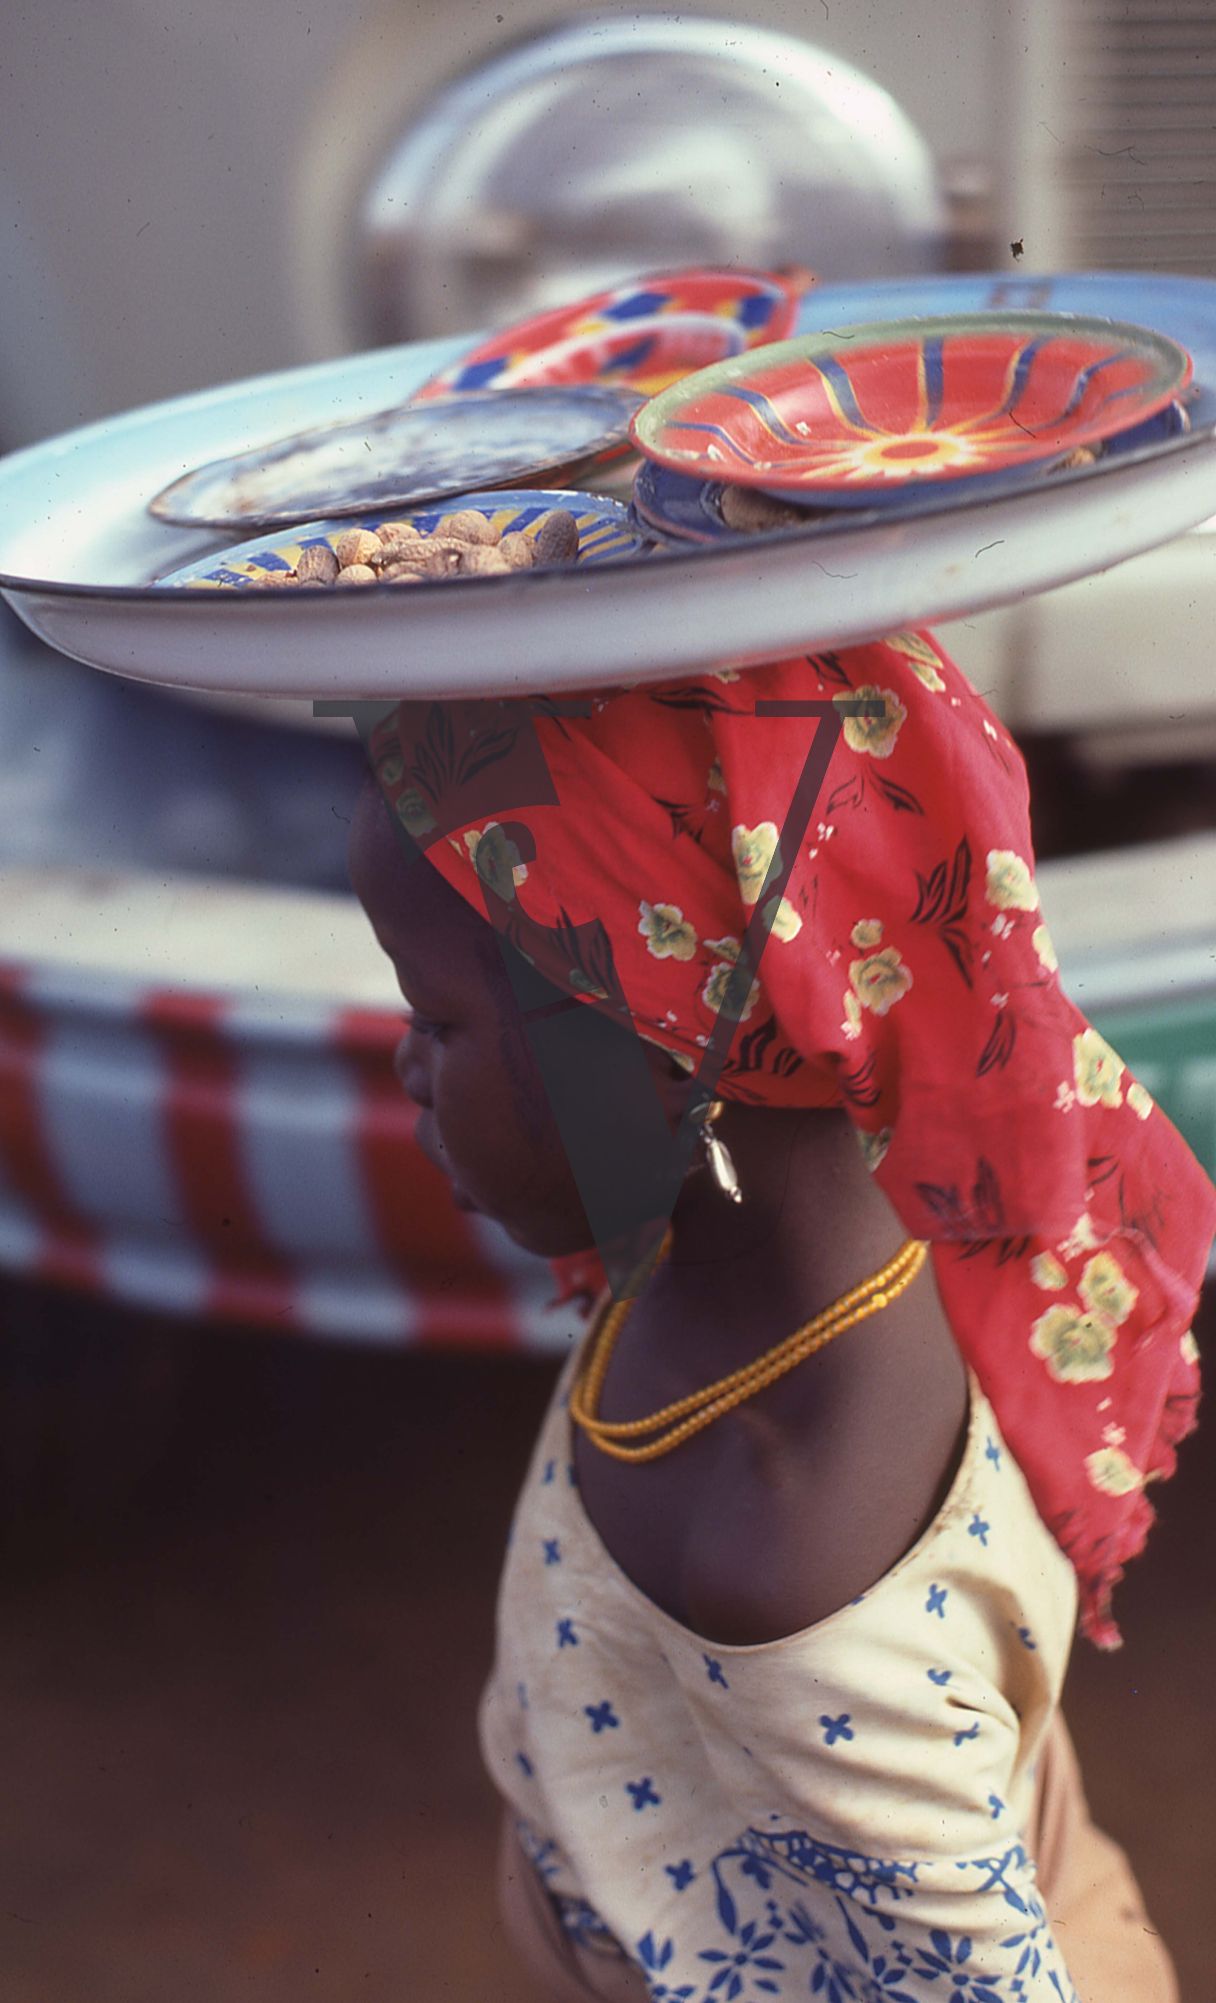 Nigeria, young girl with trays on head.